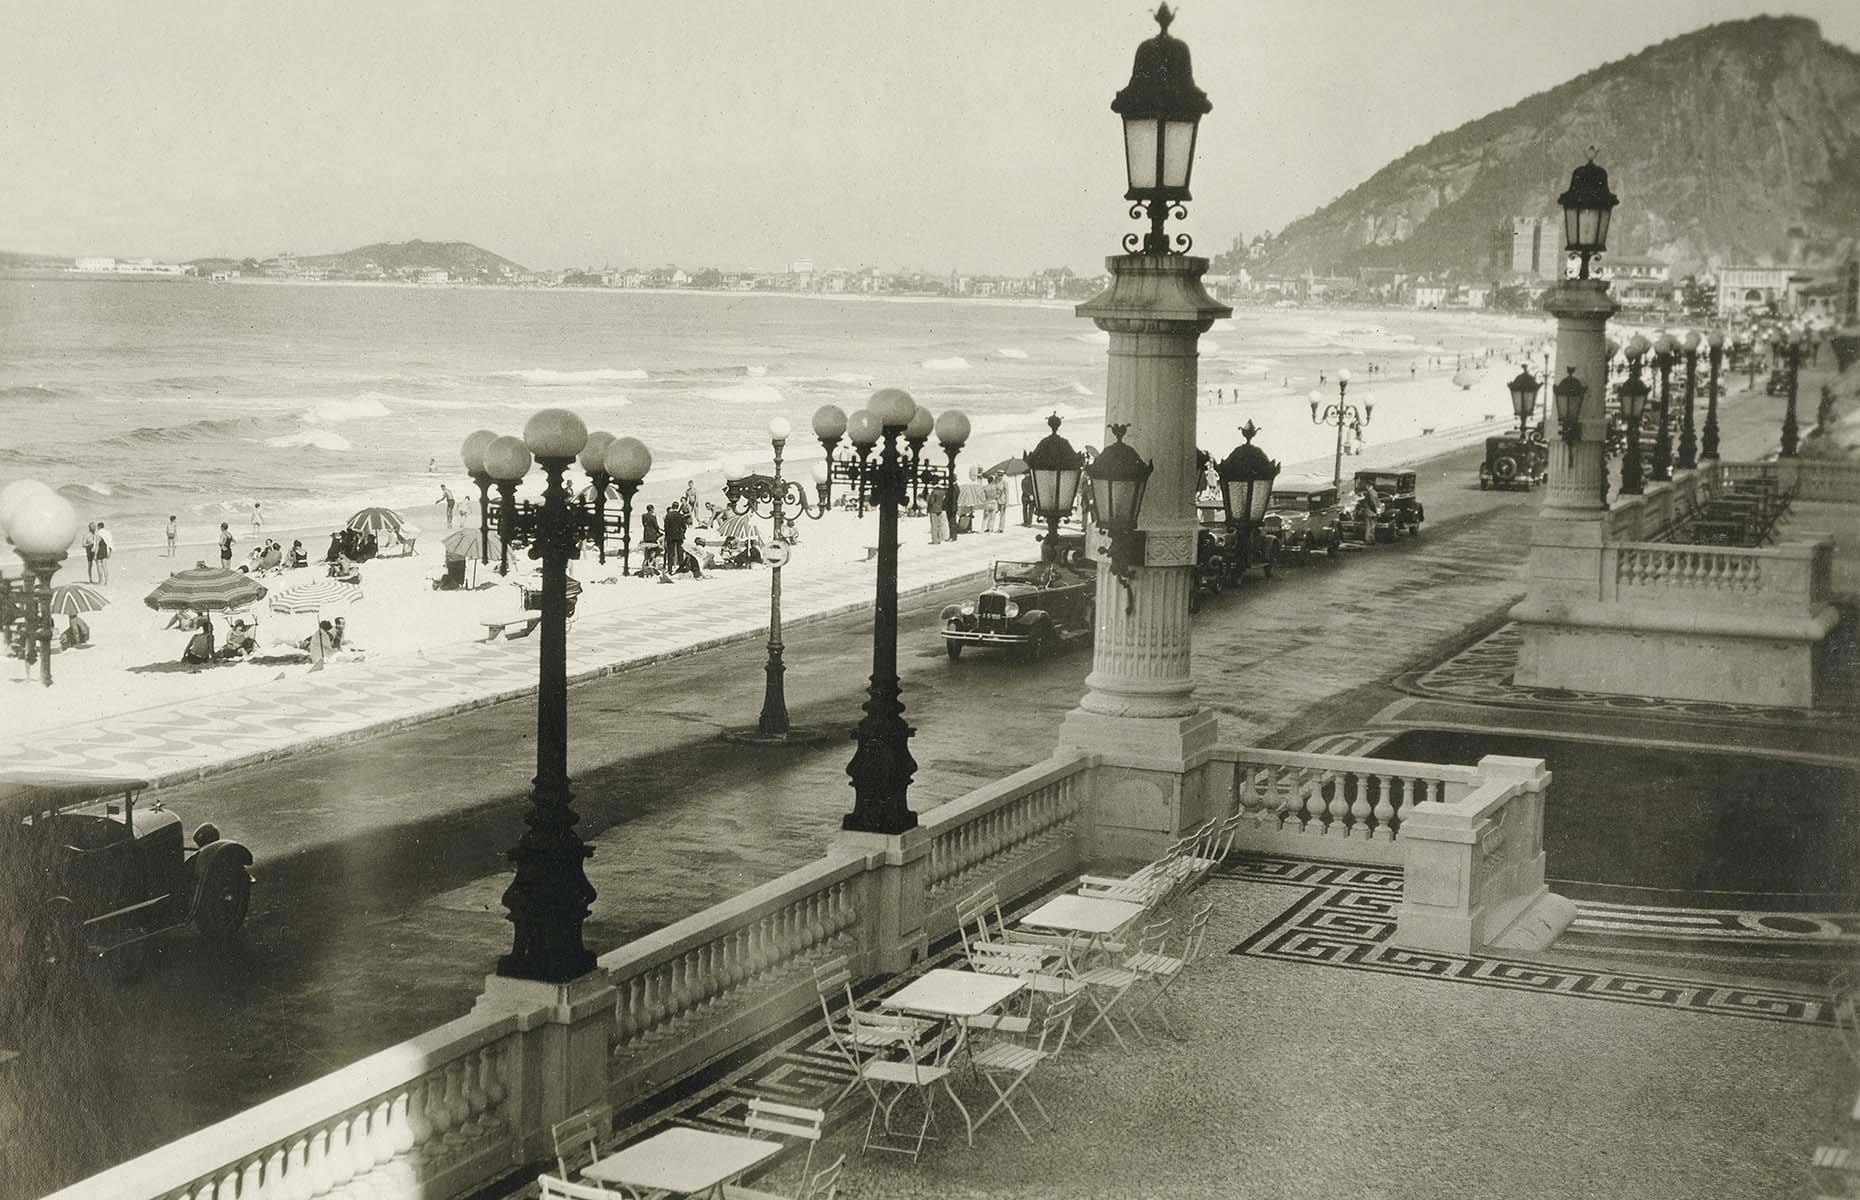 A luxury exclusive to the upper echelons of society, lounging on Copacabana beach was something most Europeans and Americans could only dream of. The Brazilian charmer was a legendary destination, with five-star hotels, first-class restaurants and entertainment facilities springing up ready to welcome royalty and movie stars. This photo, taken from Copacabana Palace circa 1930, captures the famous sands and the equally iconic wavy tiling of its beach promenade.